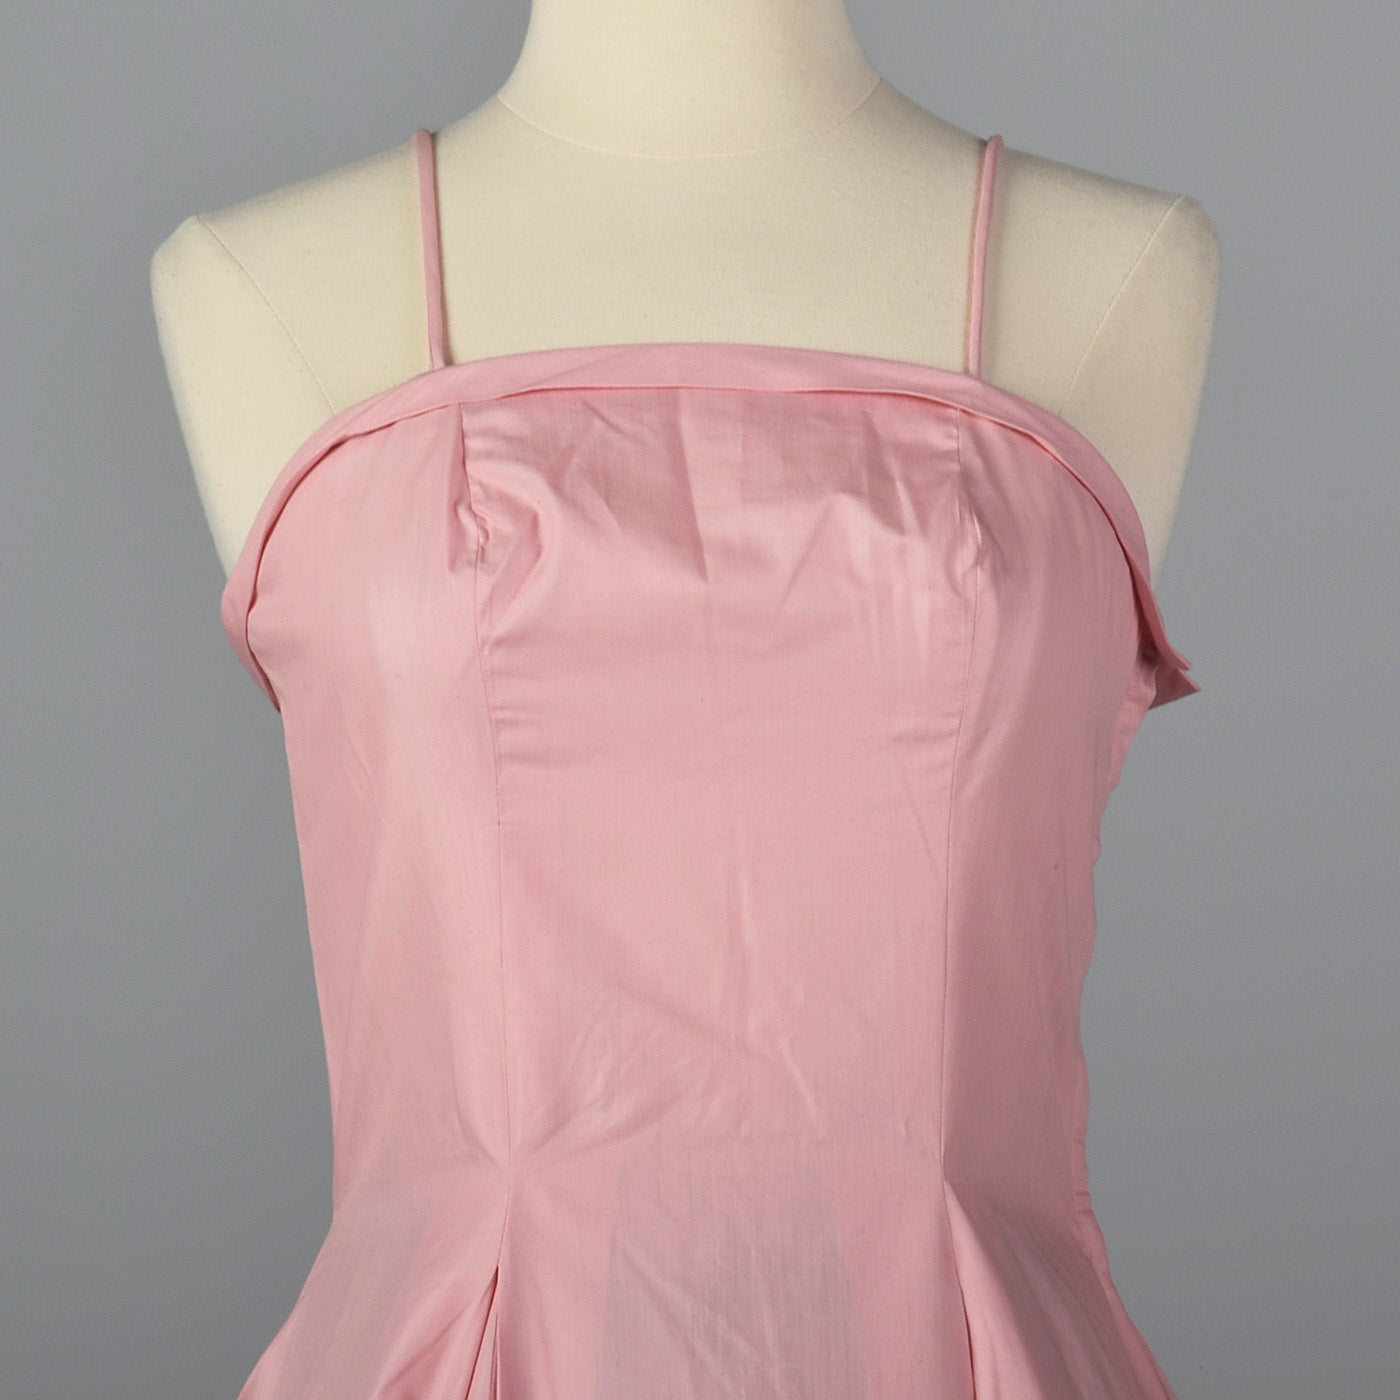 1950s Pink Party Dress with Full Skirt